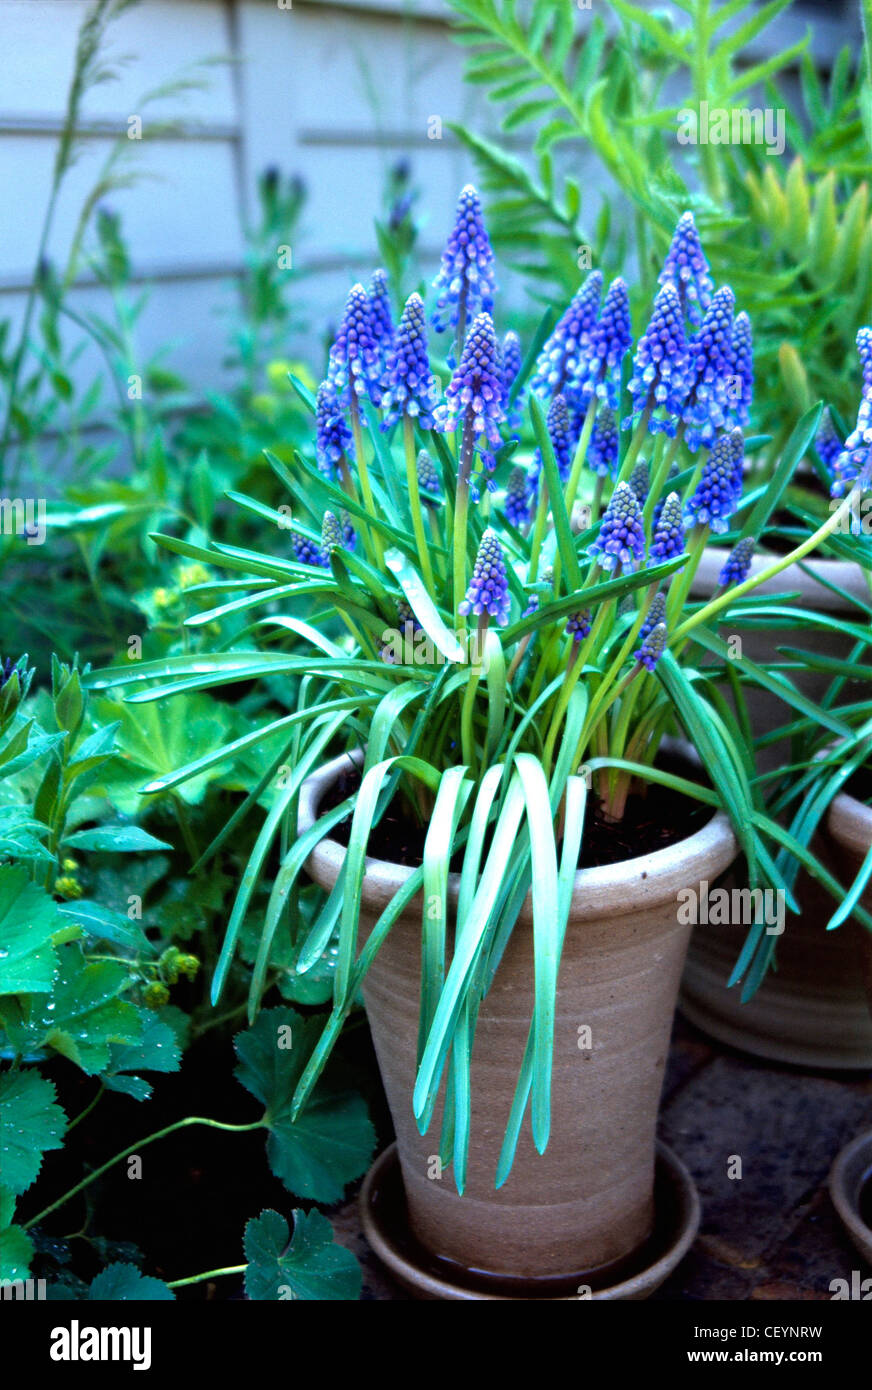 Small gardens at Chelsea flower show  Close up of Muscari aremeniacum blue flowers and long green leaves in terracotta pot, Stock Photo